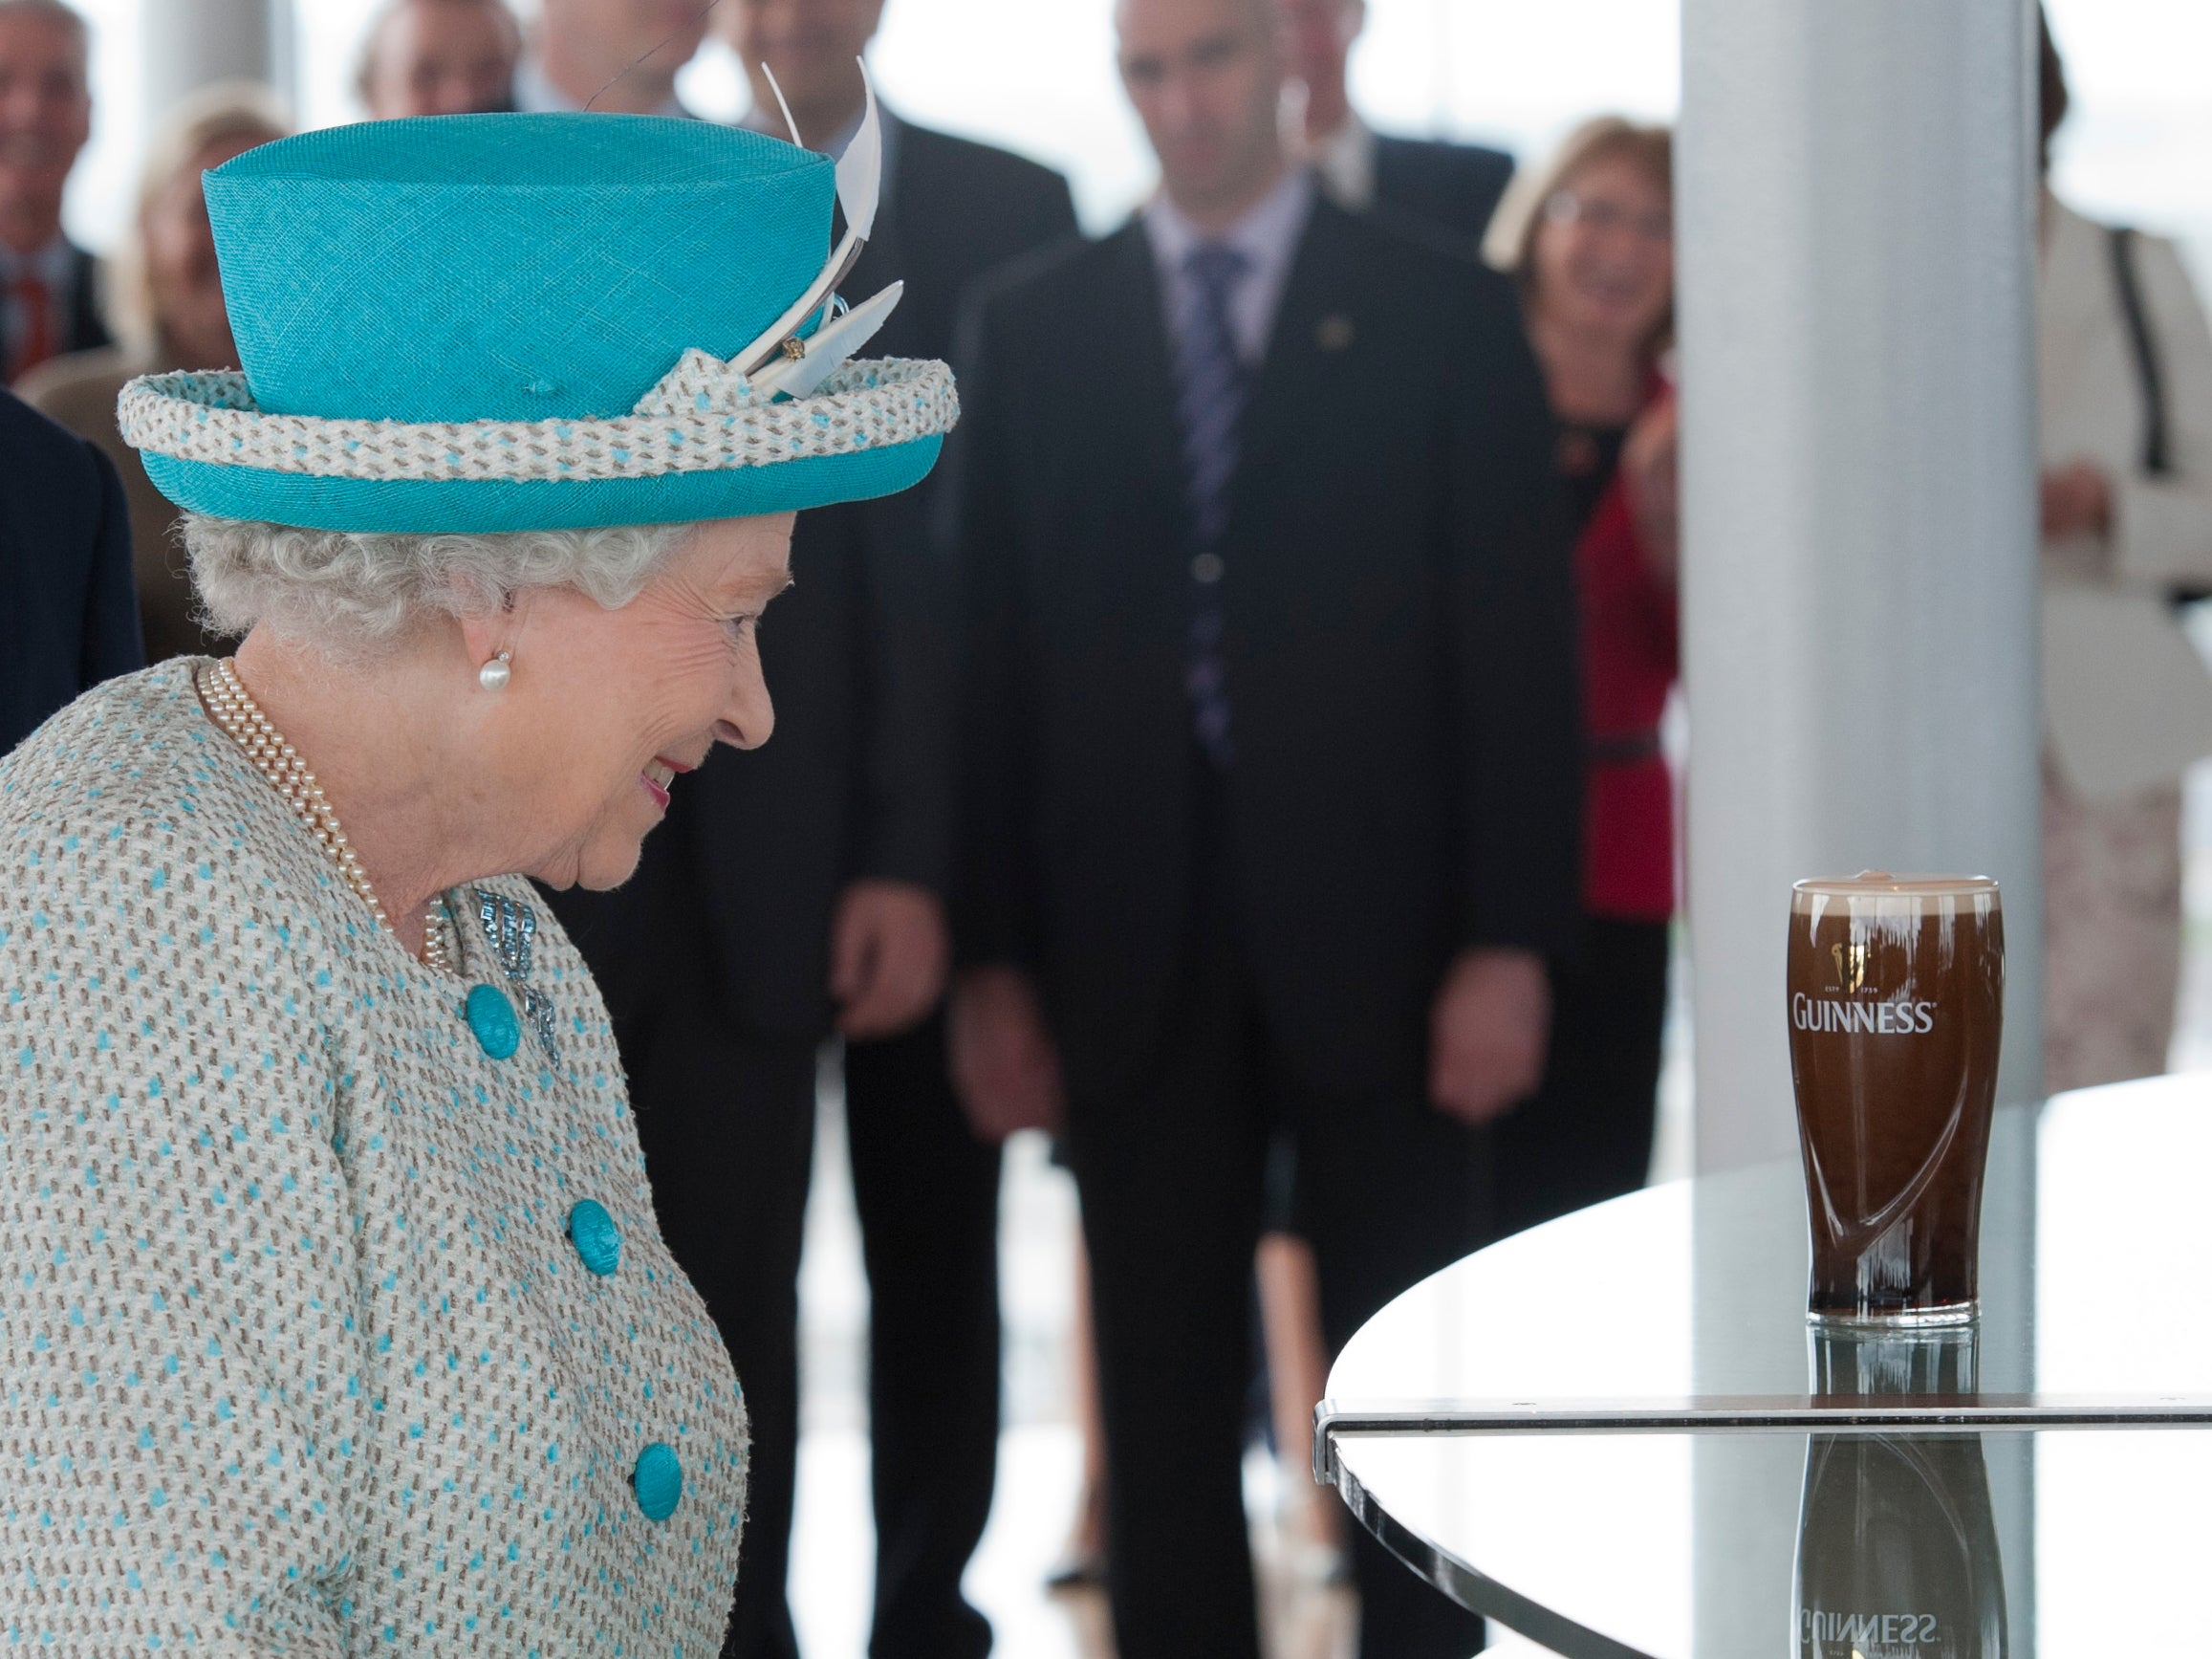 Queen Elizabeth II watches a pint of Guinness being poured as they visit the Guinness Storehouse in 2011